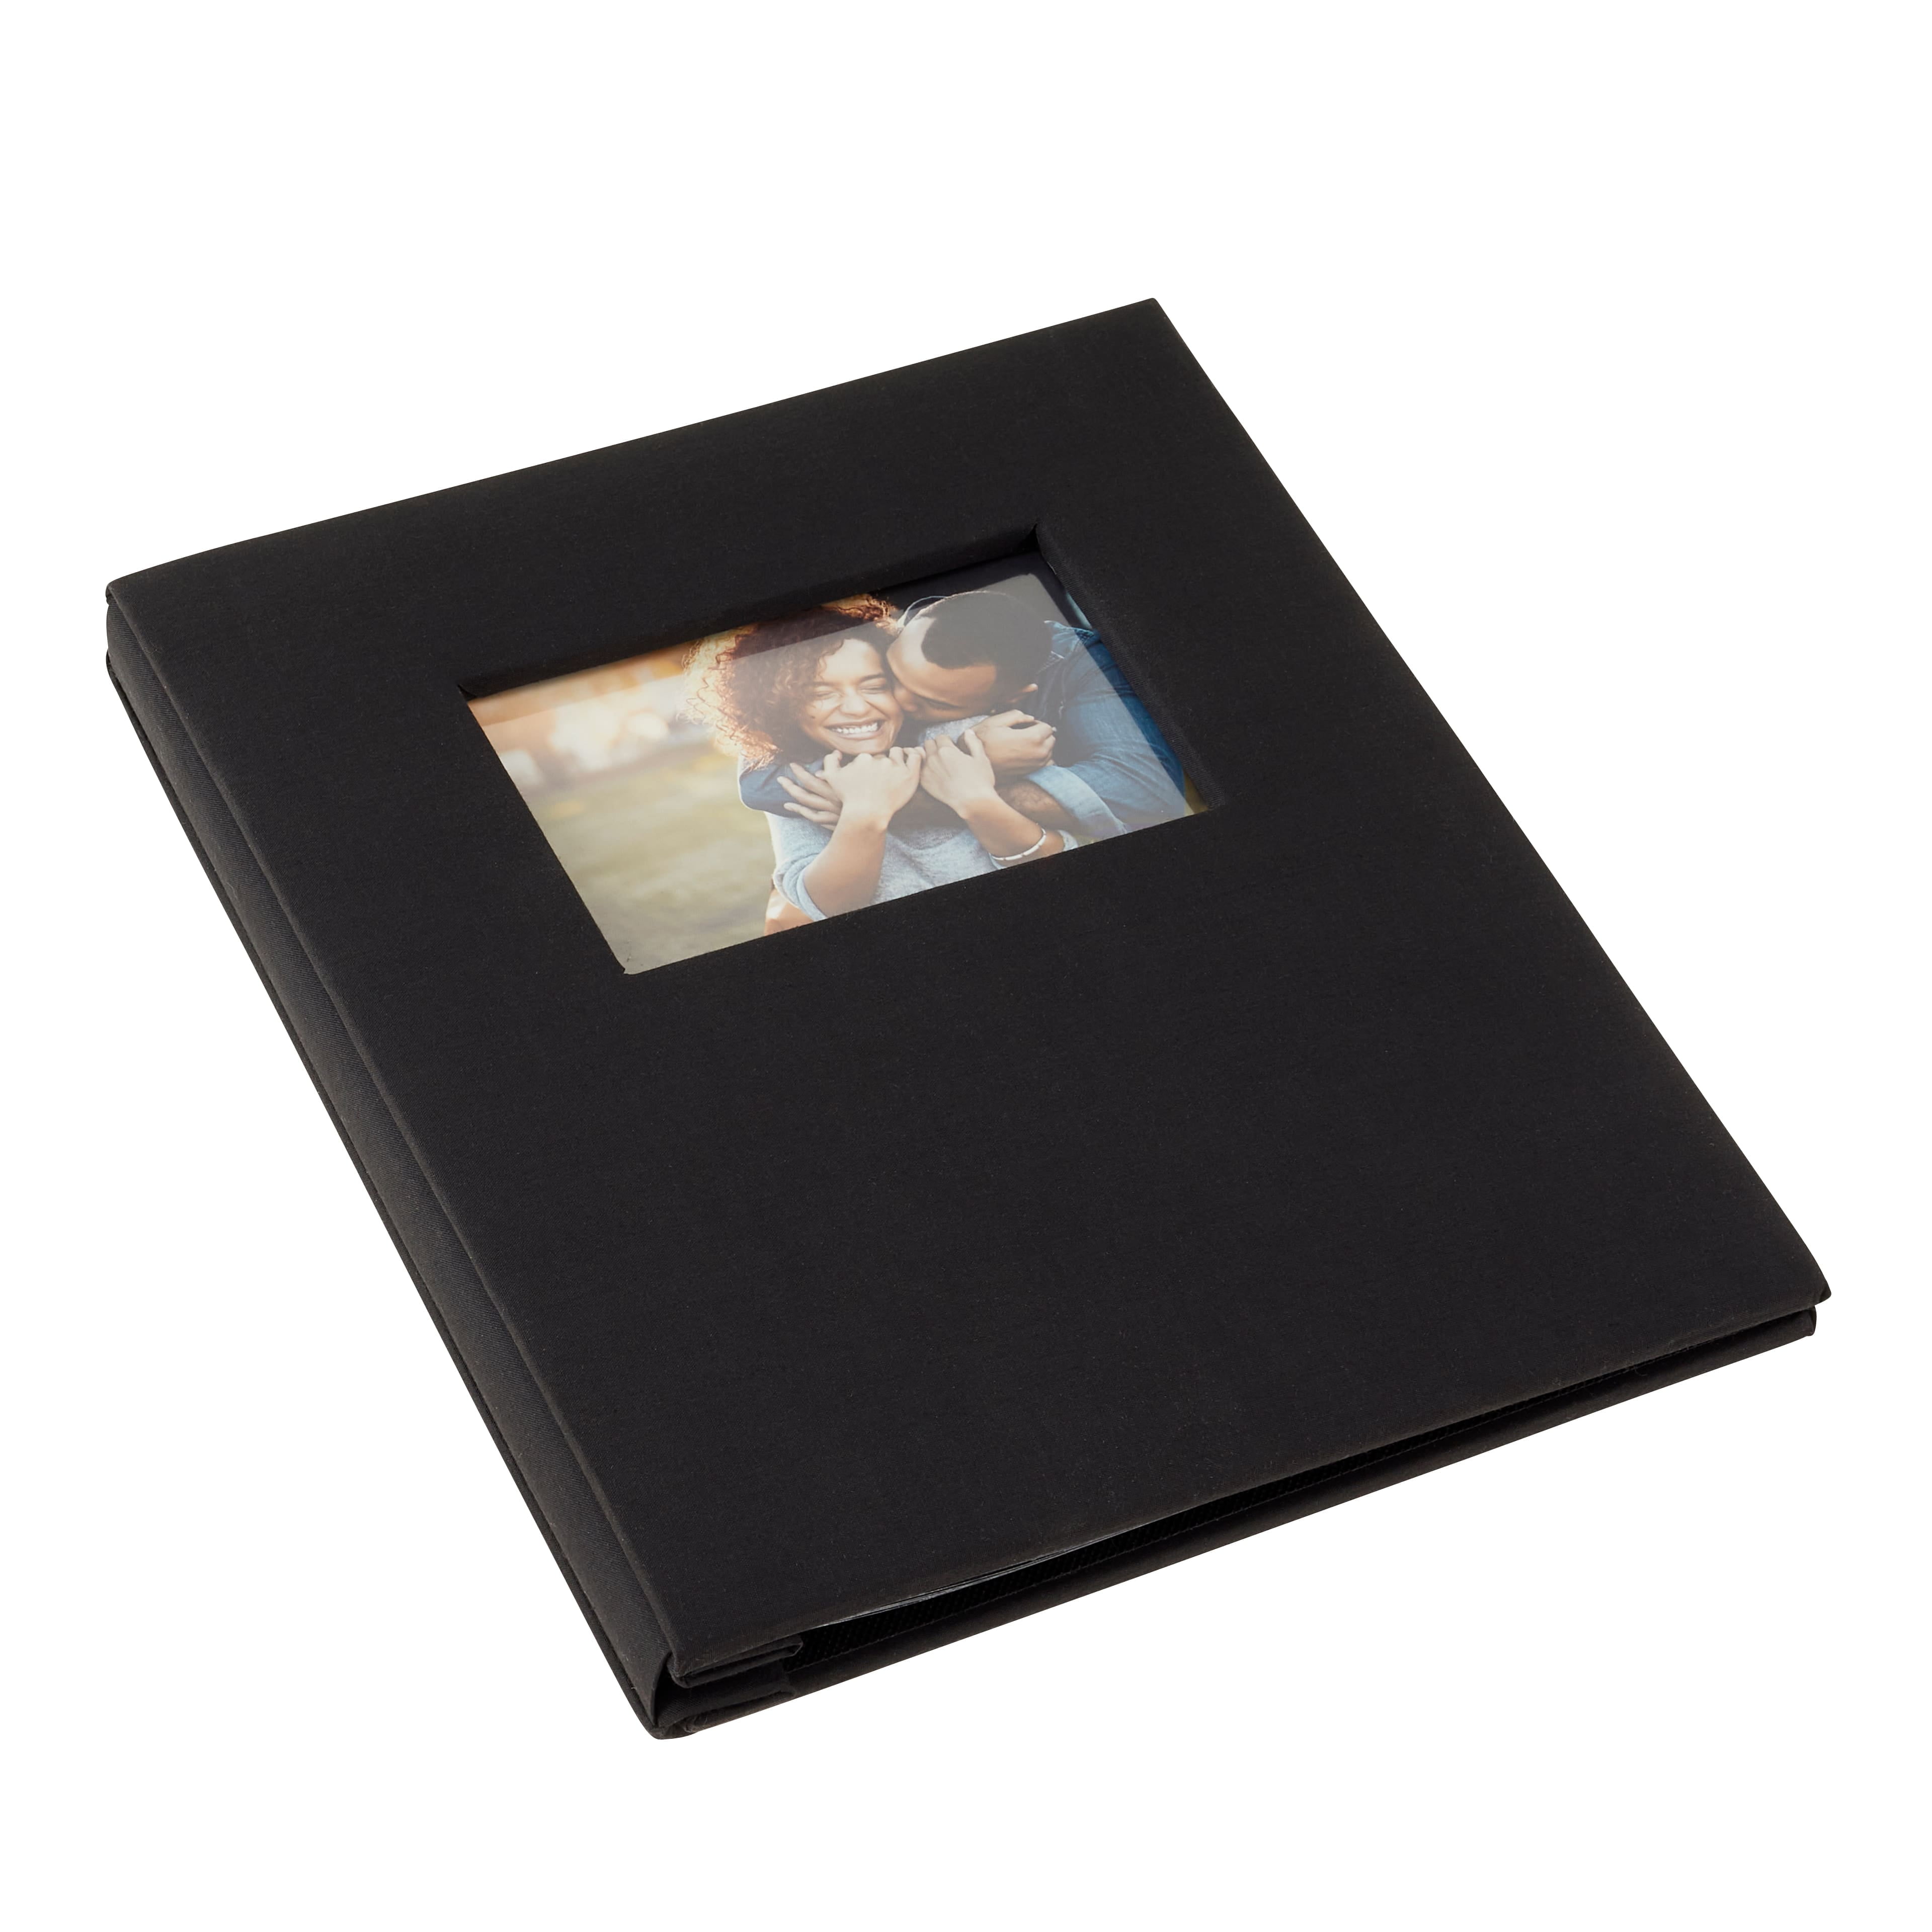 6 Pack: Black Scrapbook Album, 8.5 x 11 by Recollections